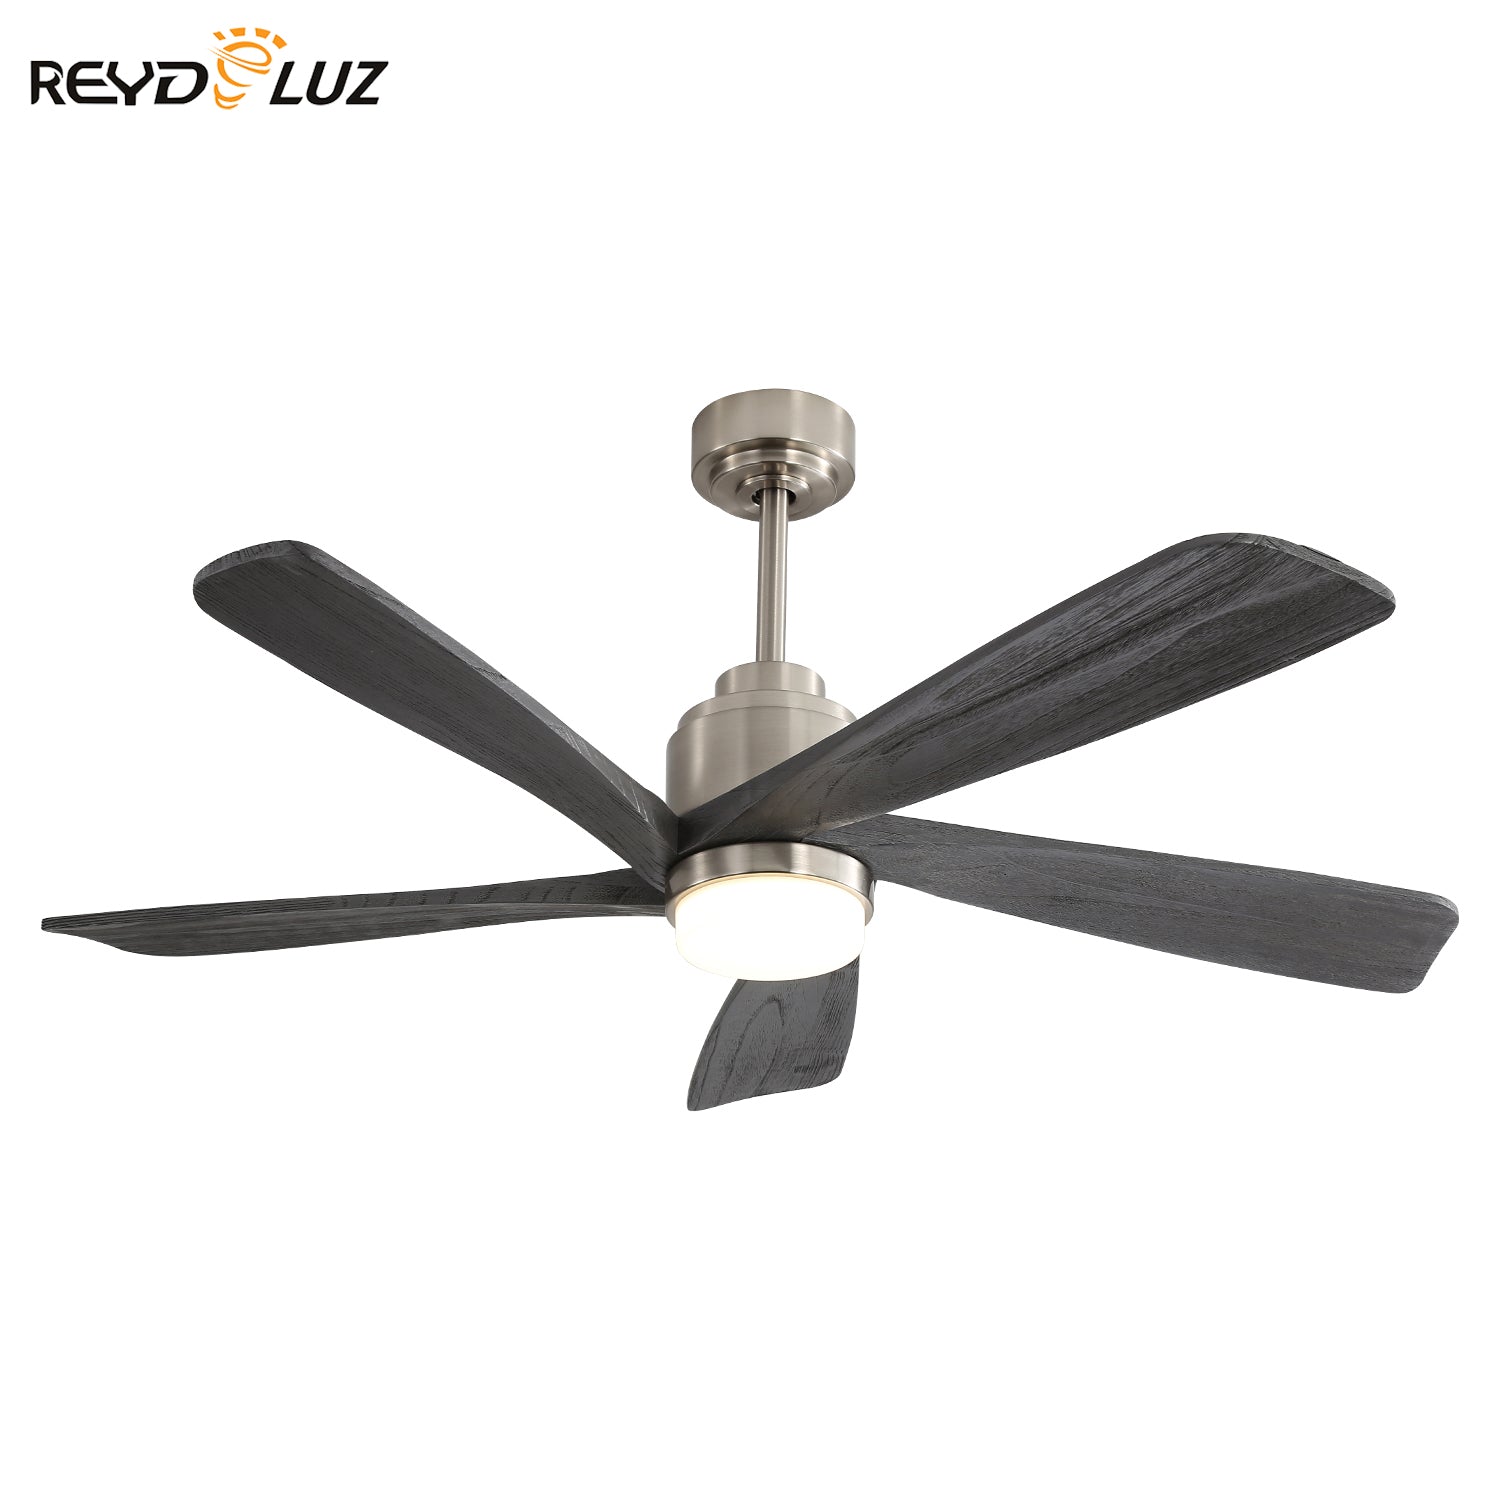 REYDELUZ 52" Modern Ceiling Fan With Dimmable LED Light.